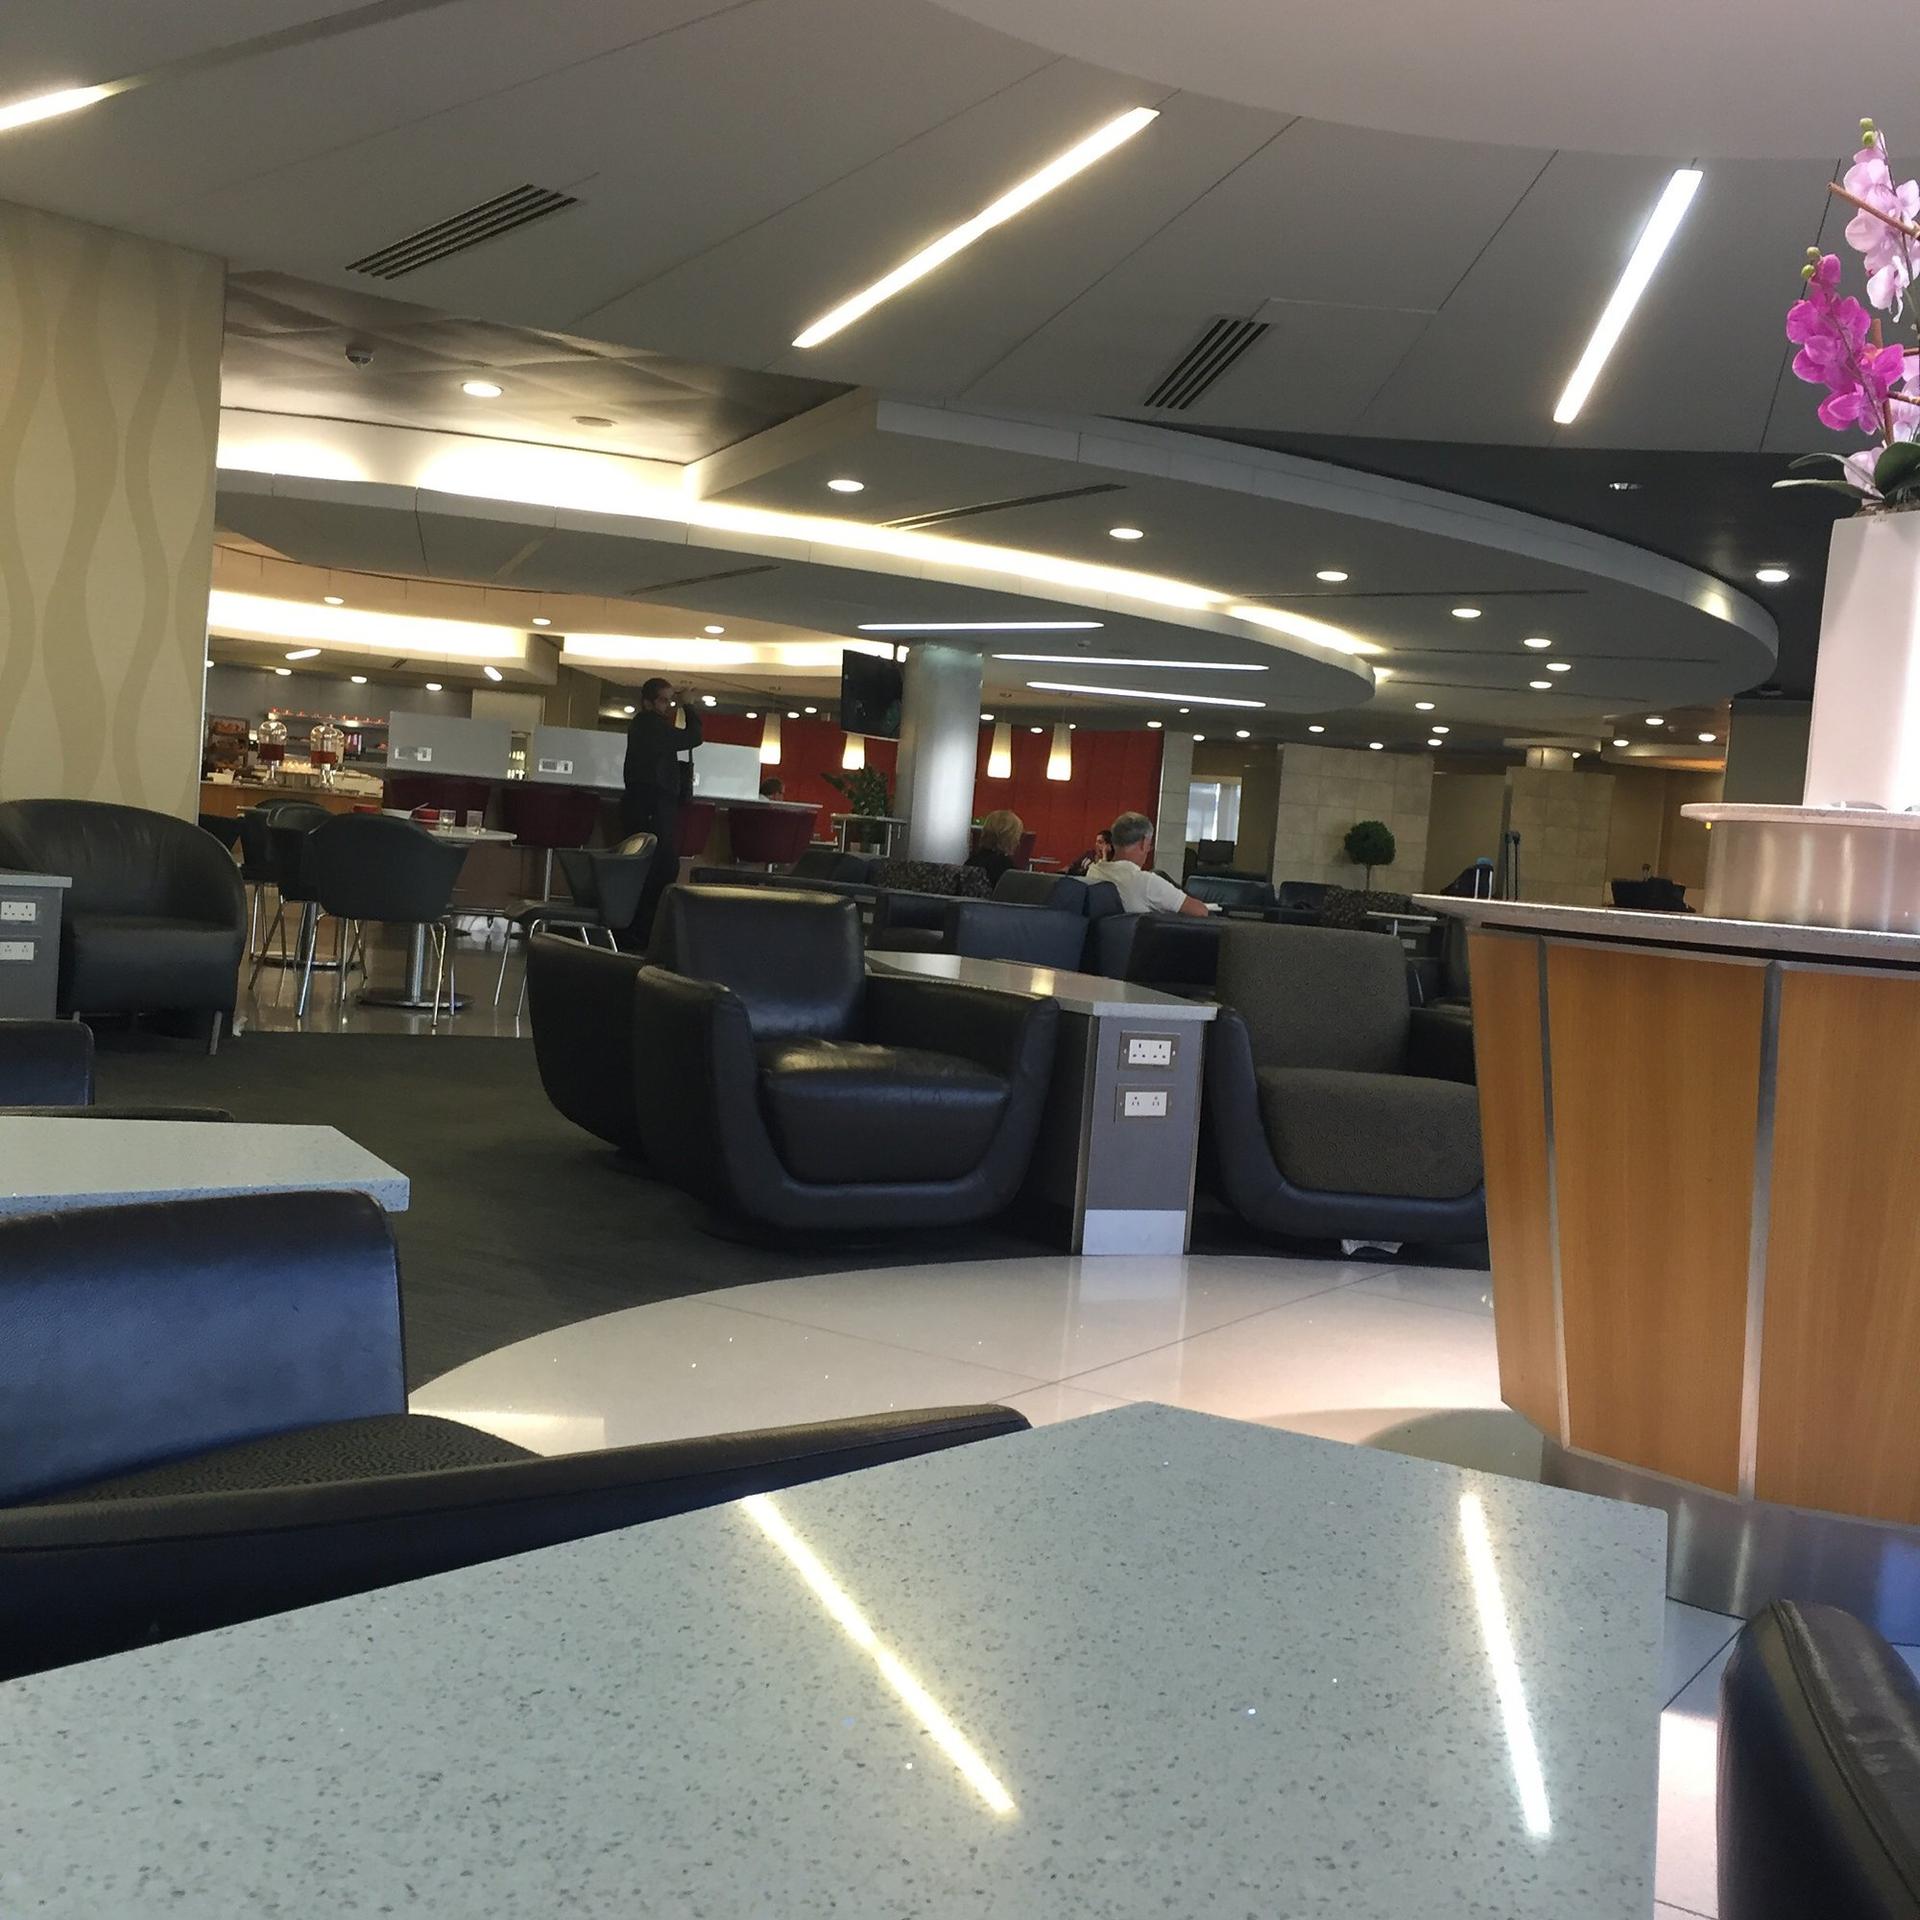 American Airlines Admirals Club image 37 of 38